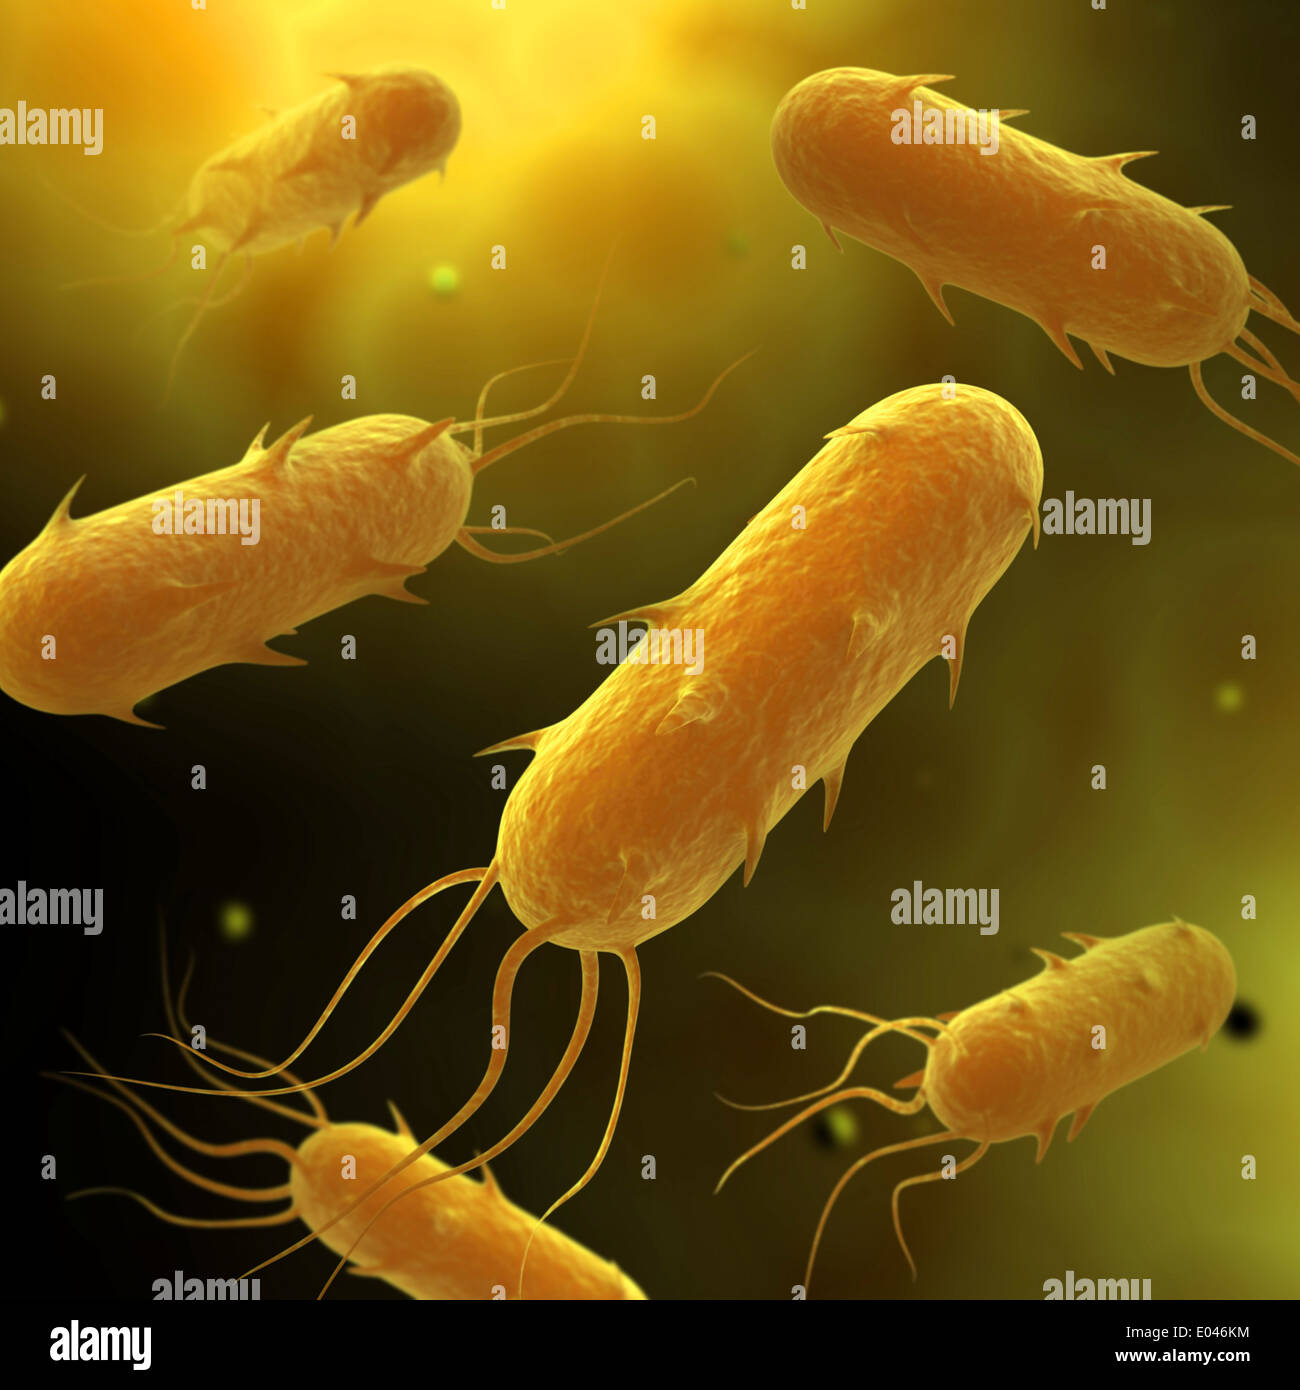 Conceptual image of flagellate bacterium. Stock Photo